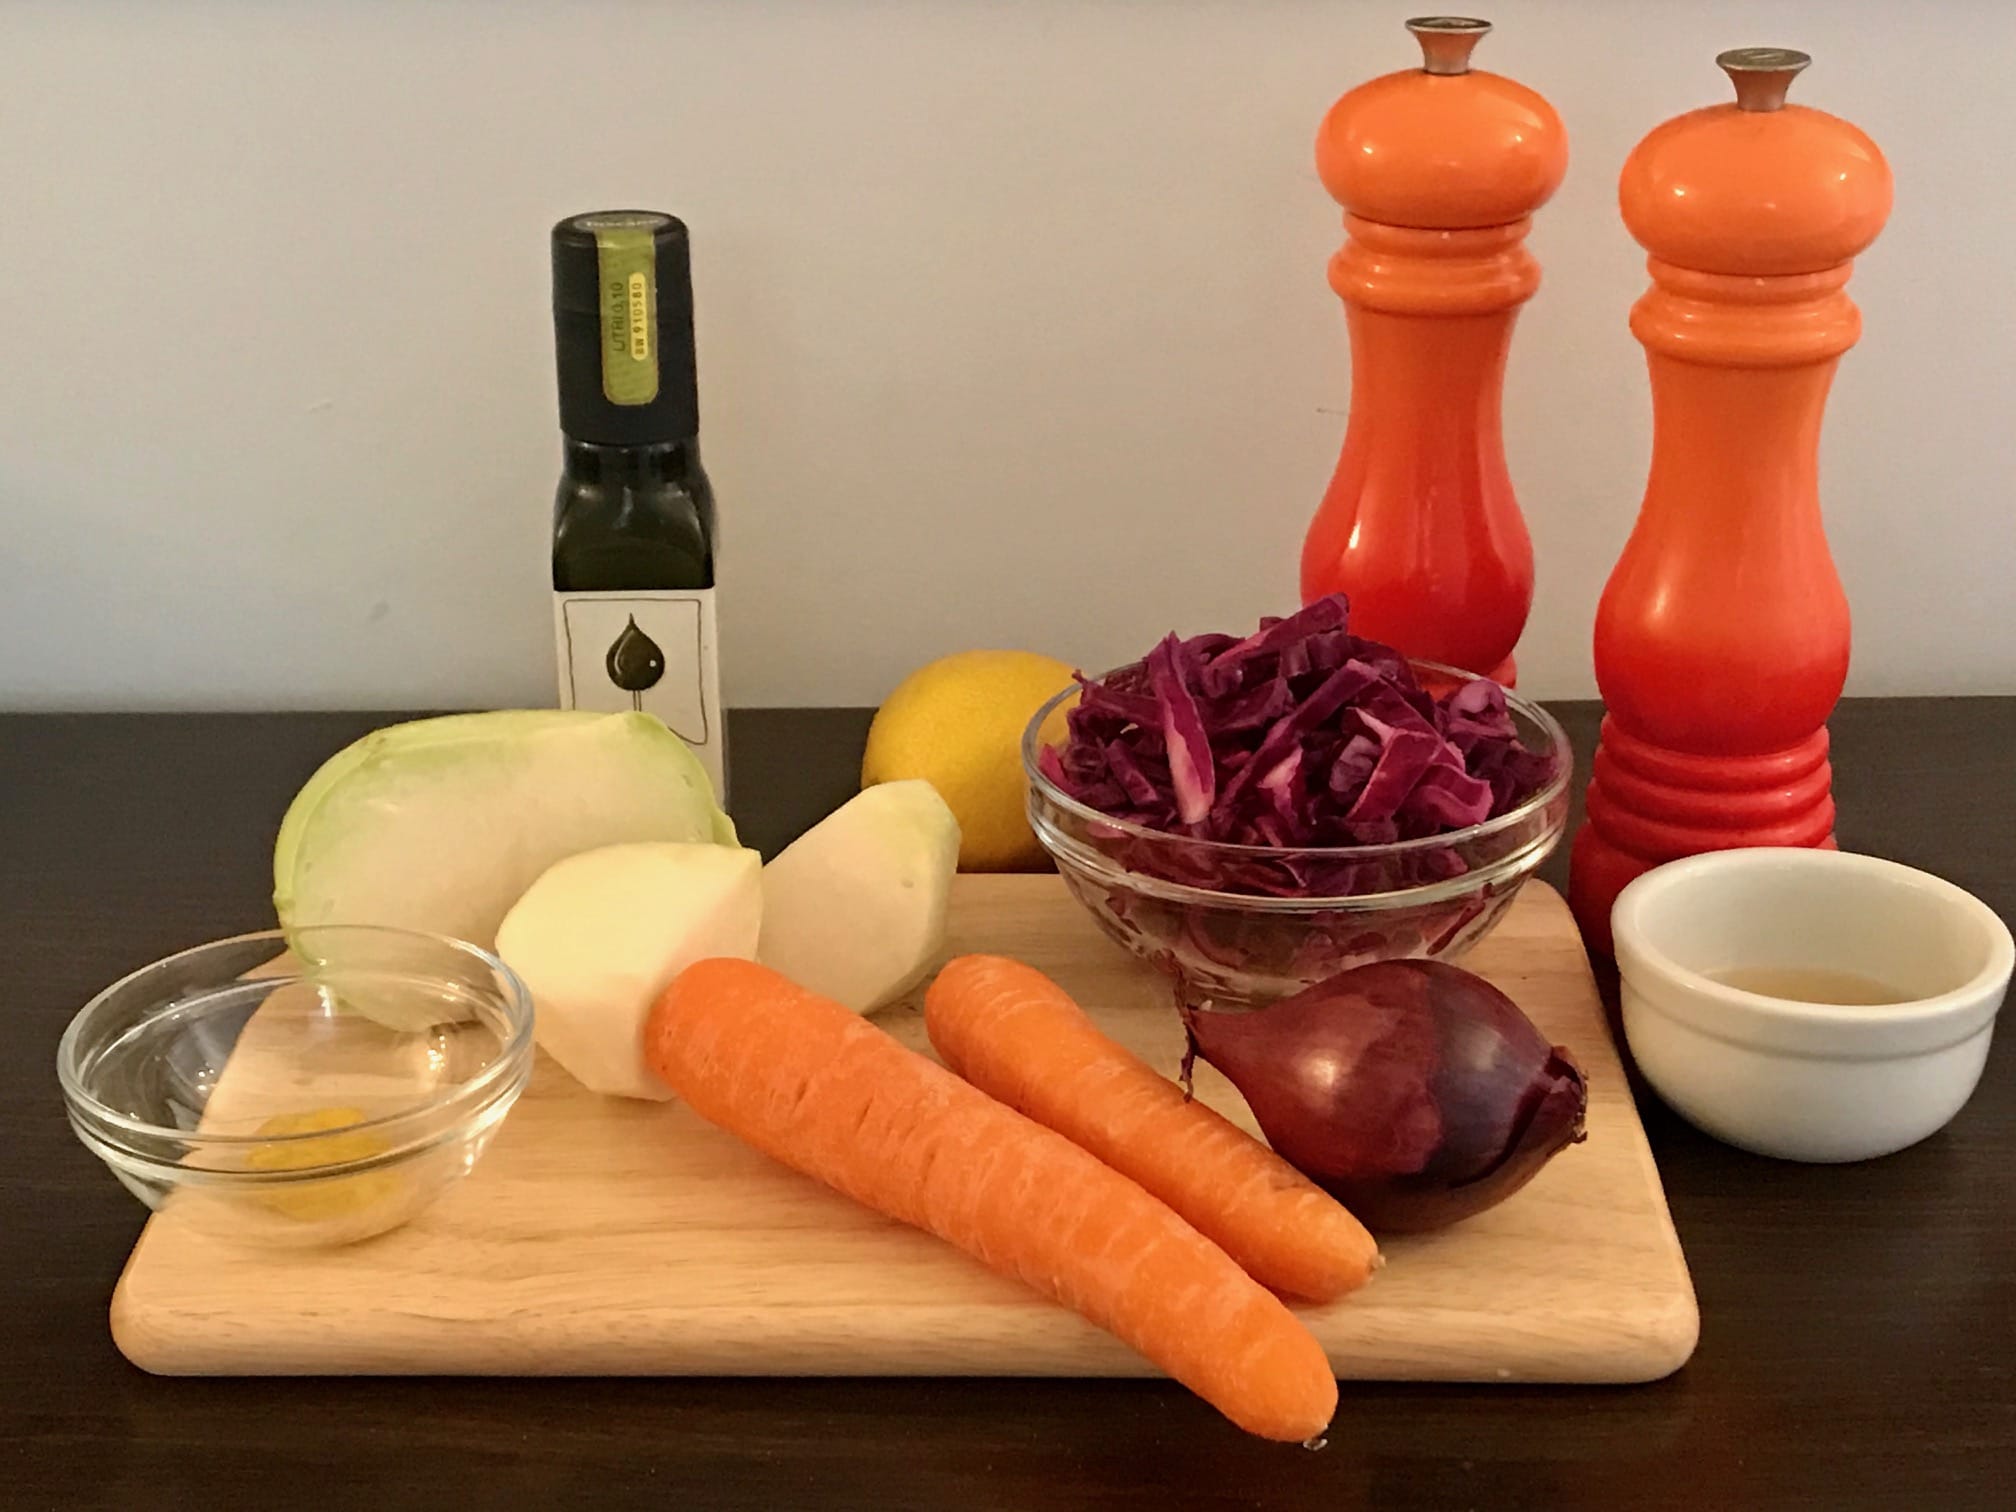 Slaw ingredients laid out on a table